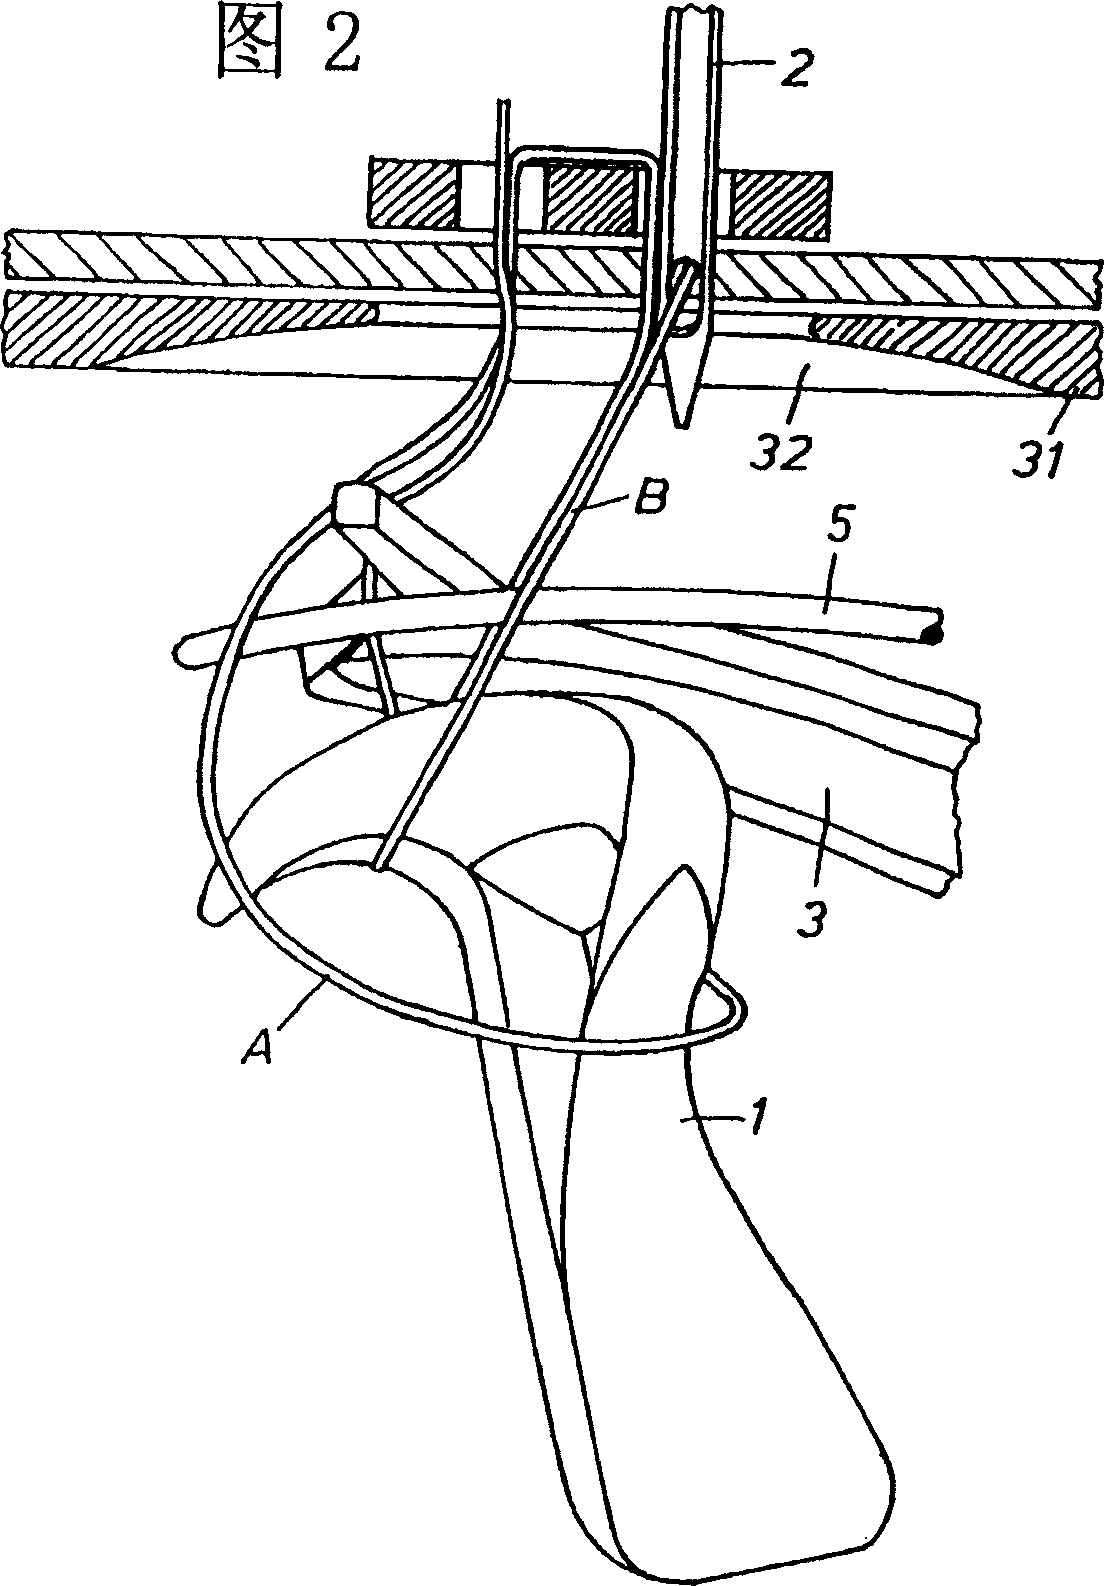 Method and apparatus for forming single-thread chain sewing end knot